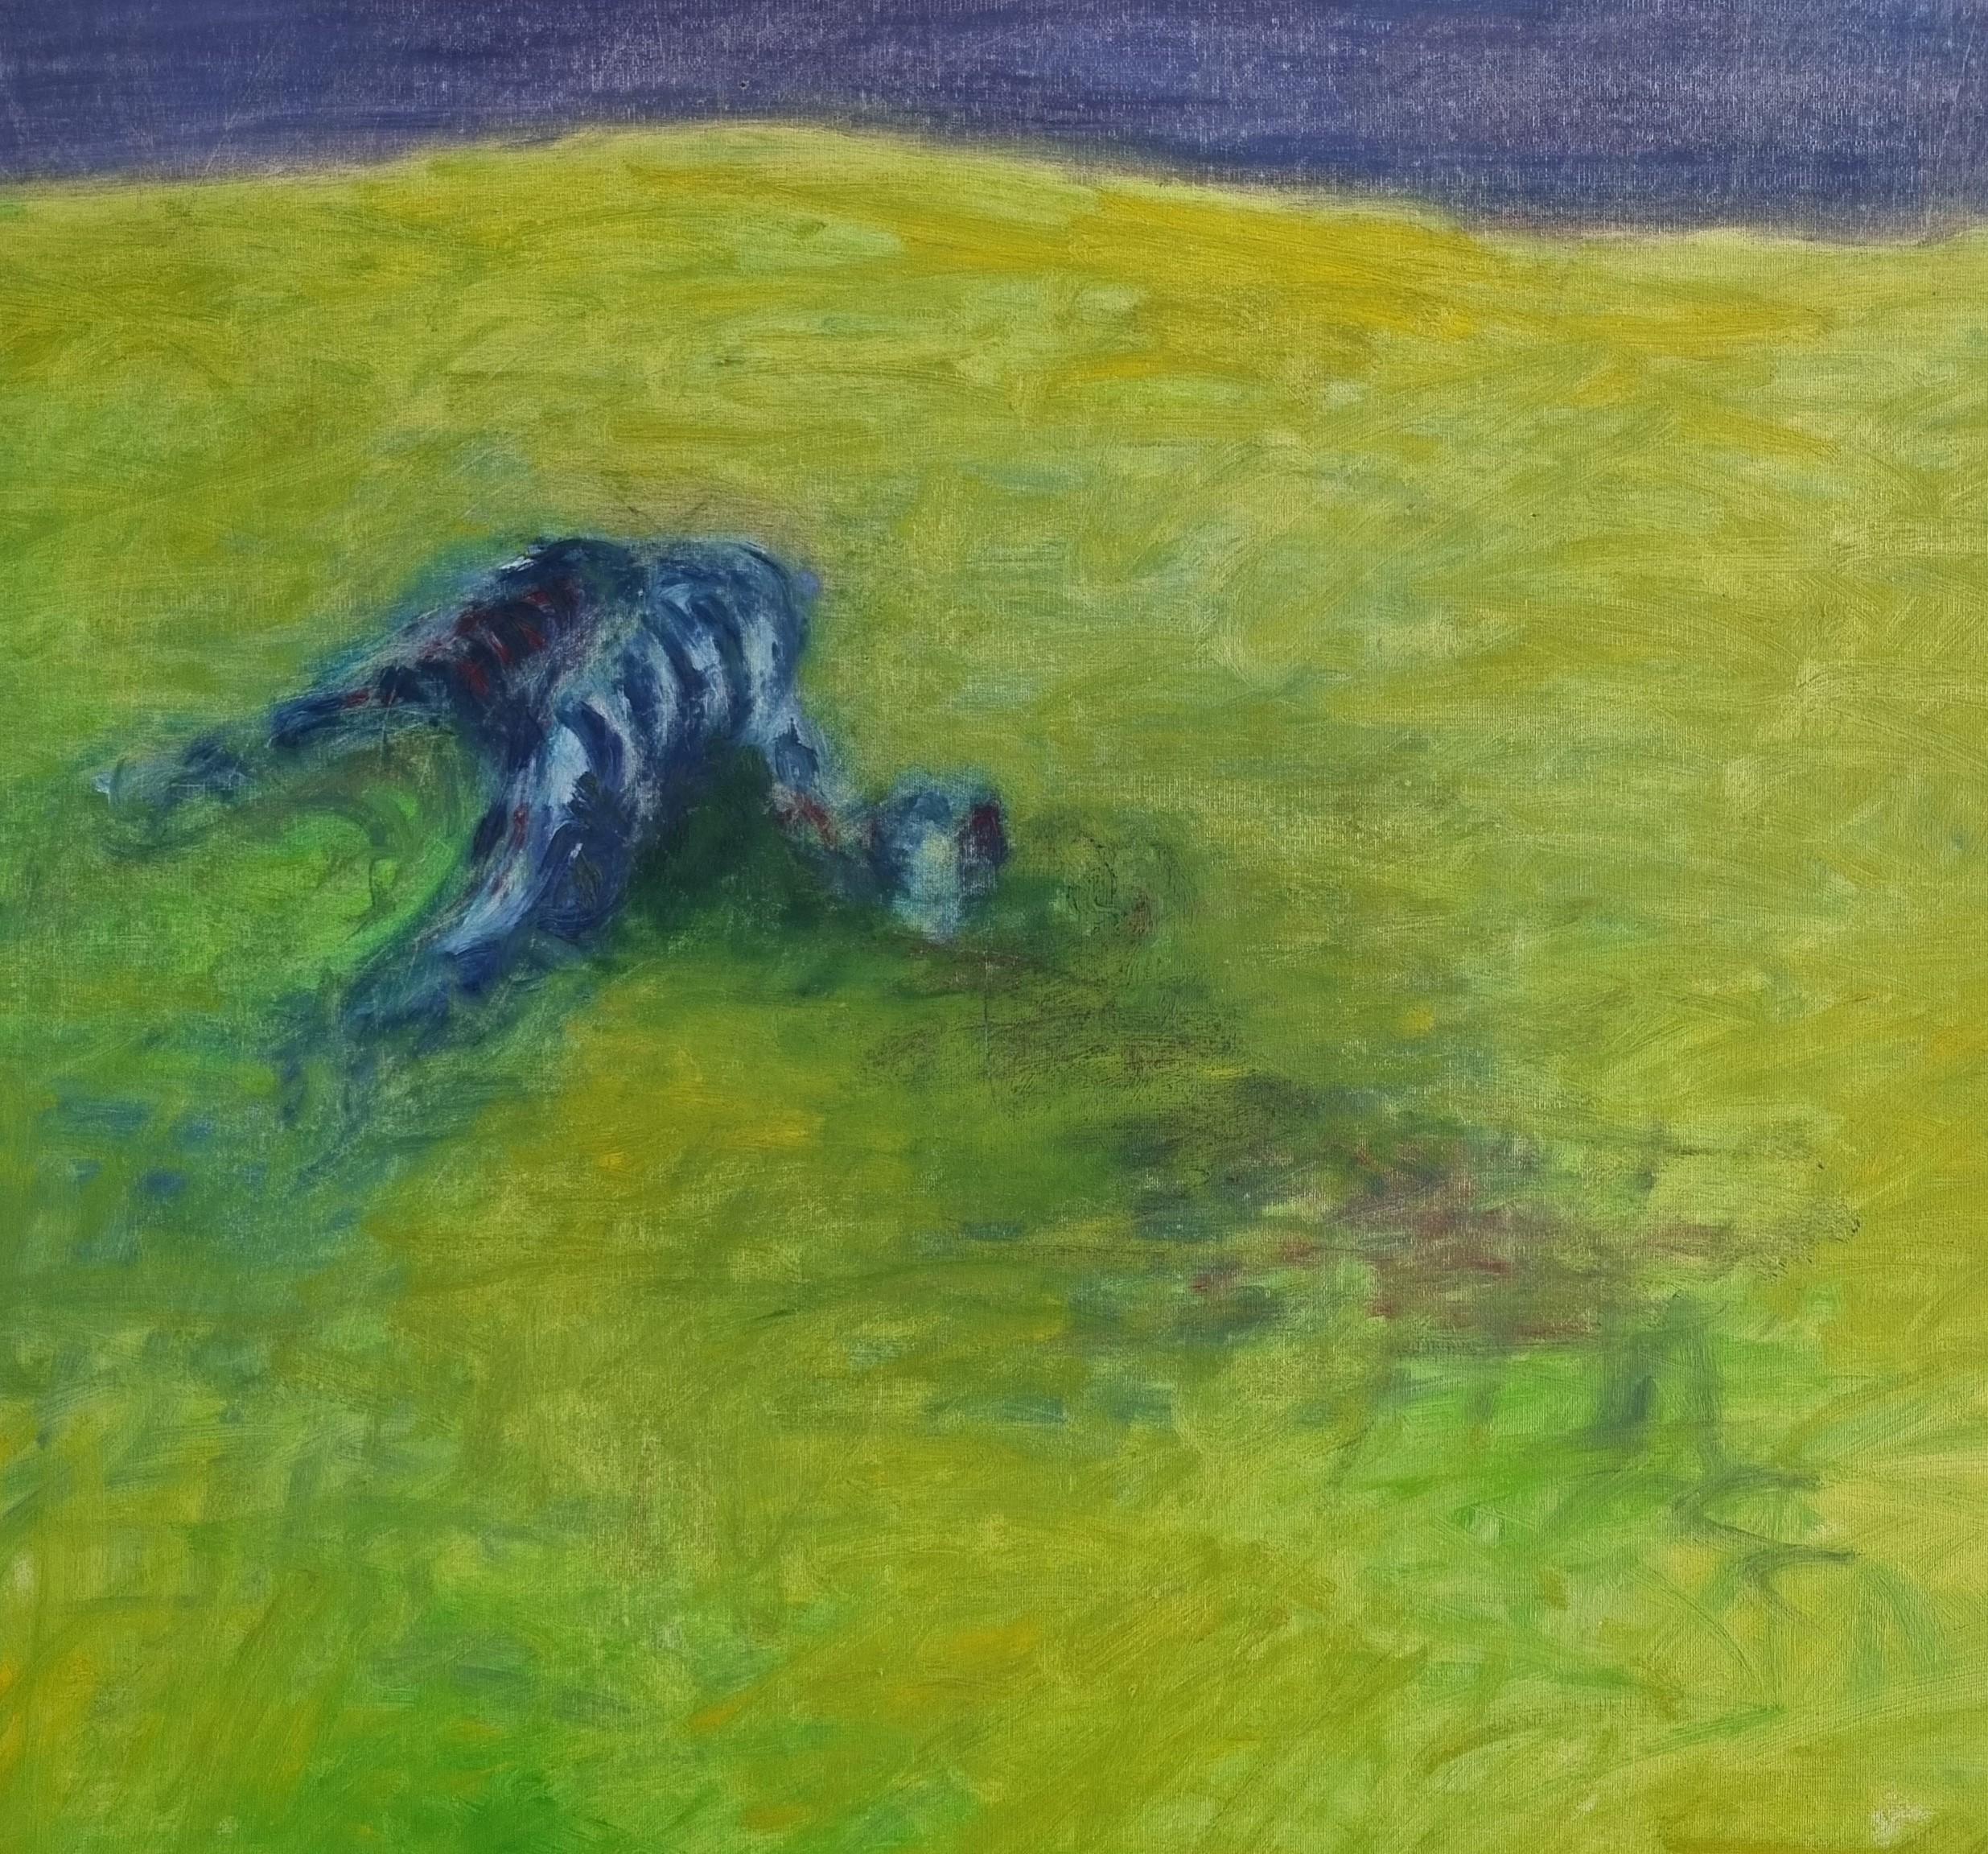 Body in the Field 1, 2022
oil on canvas
55 1/8 H x 39 3/8 W in.
140 H x 100 W cm

Zsolt Berszán embodies in his works the dissolution of the human body through the prism of the fragment, the body in pieces, and the skeletal carcass. It is the bone